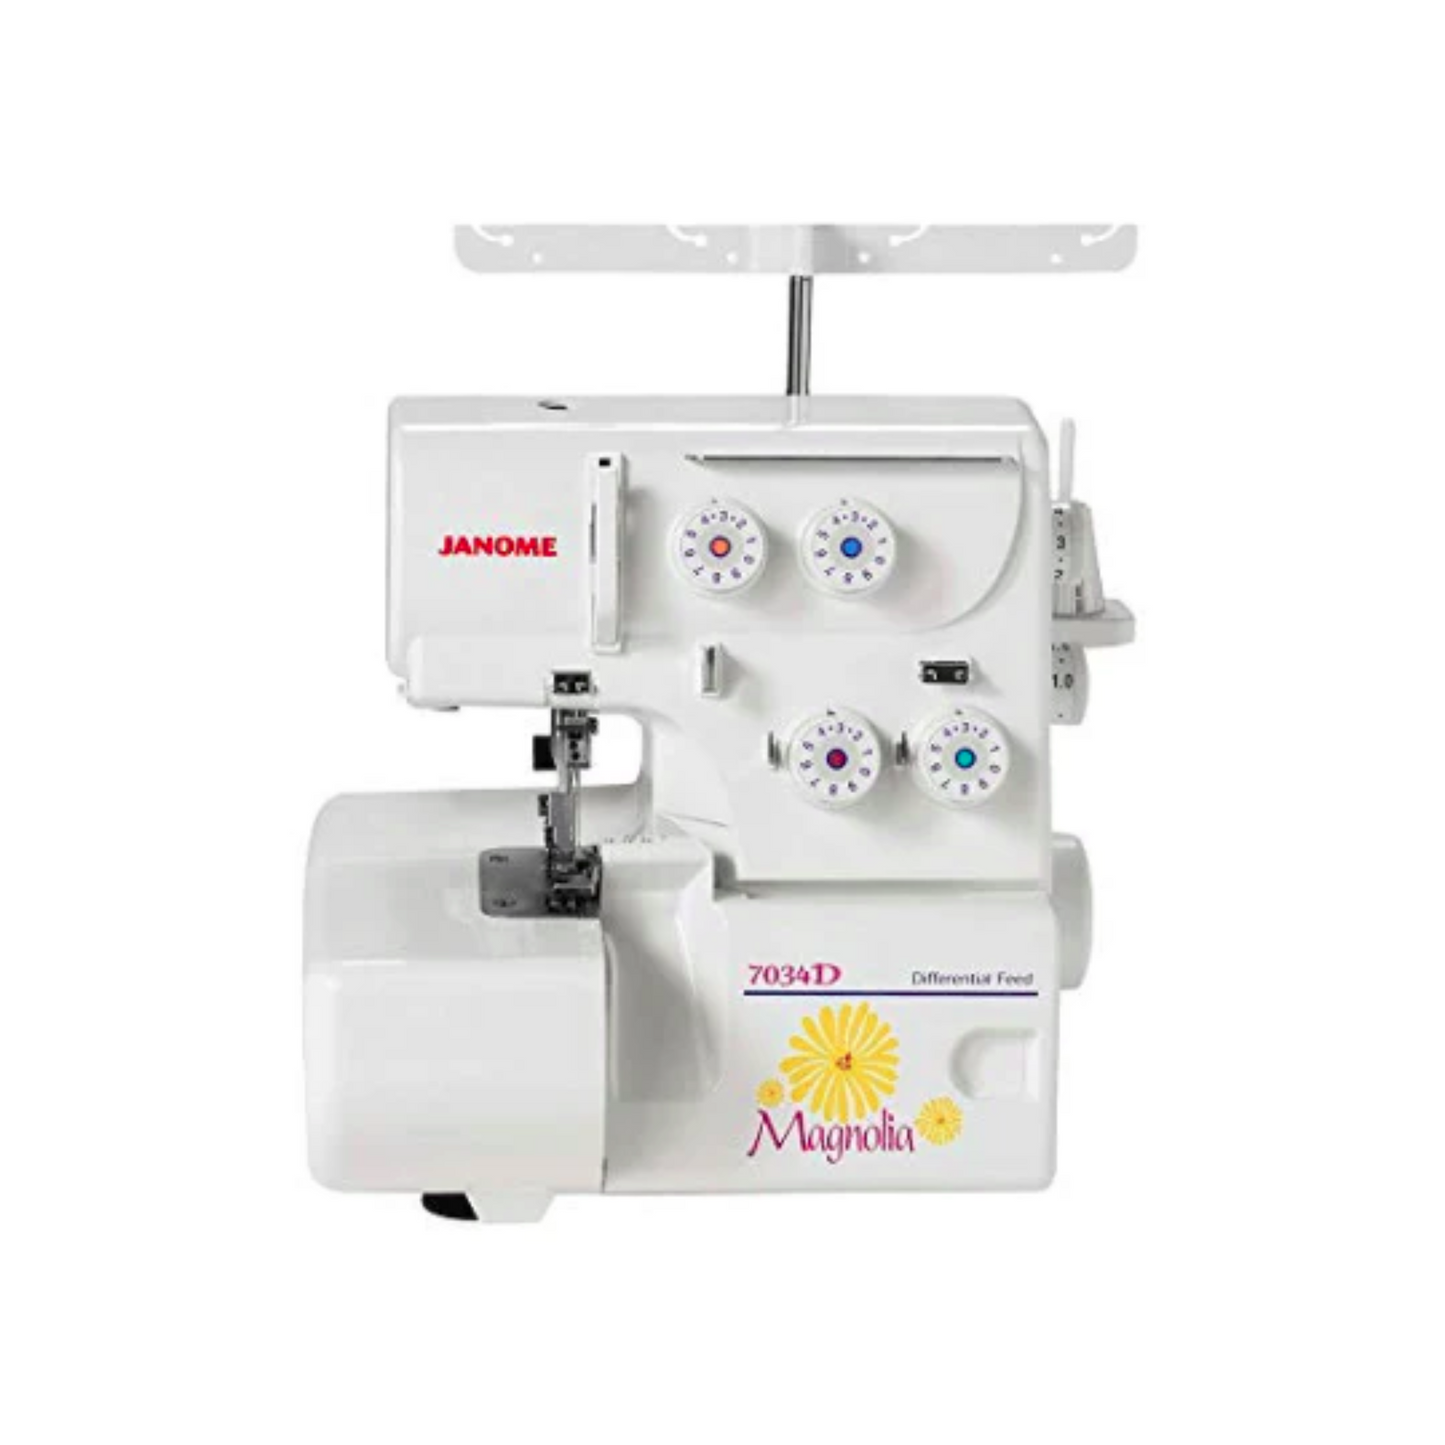 Janome 7034D magnolia serger - Sewing machine - White - Front view